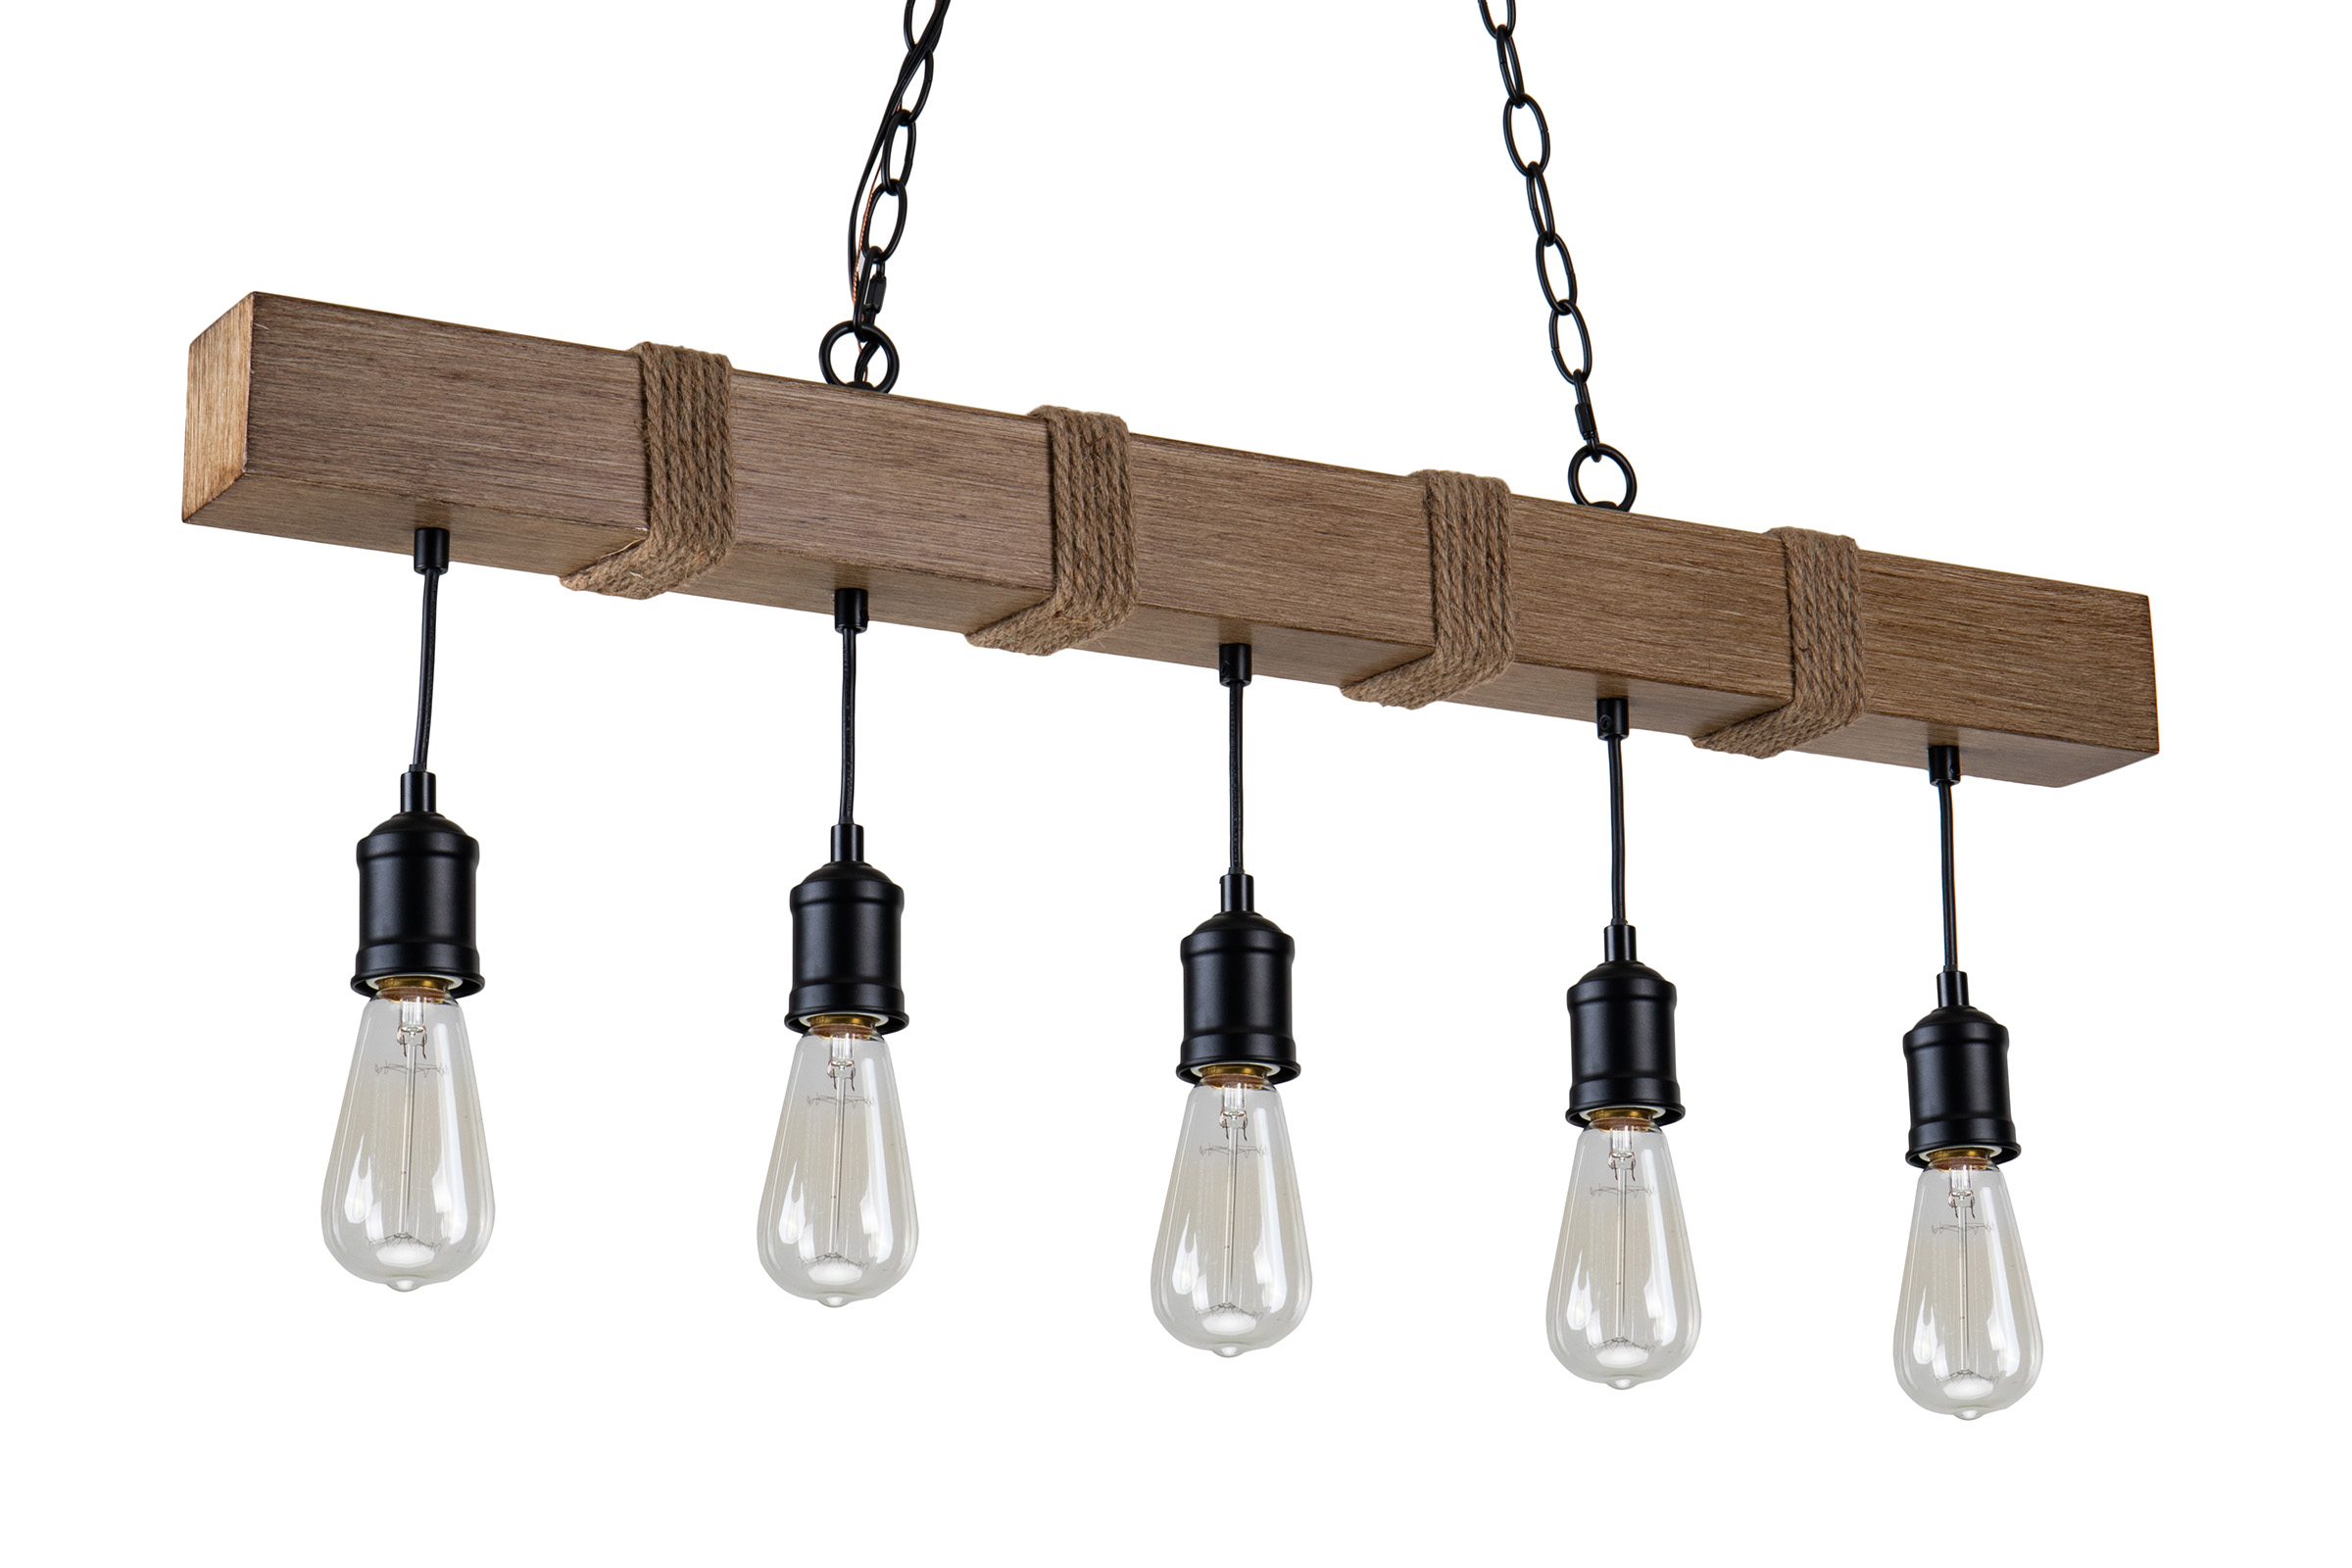 5 Light Black and Wood Finish Industrial Island Chandelier – Edvivi ...